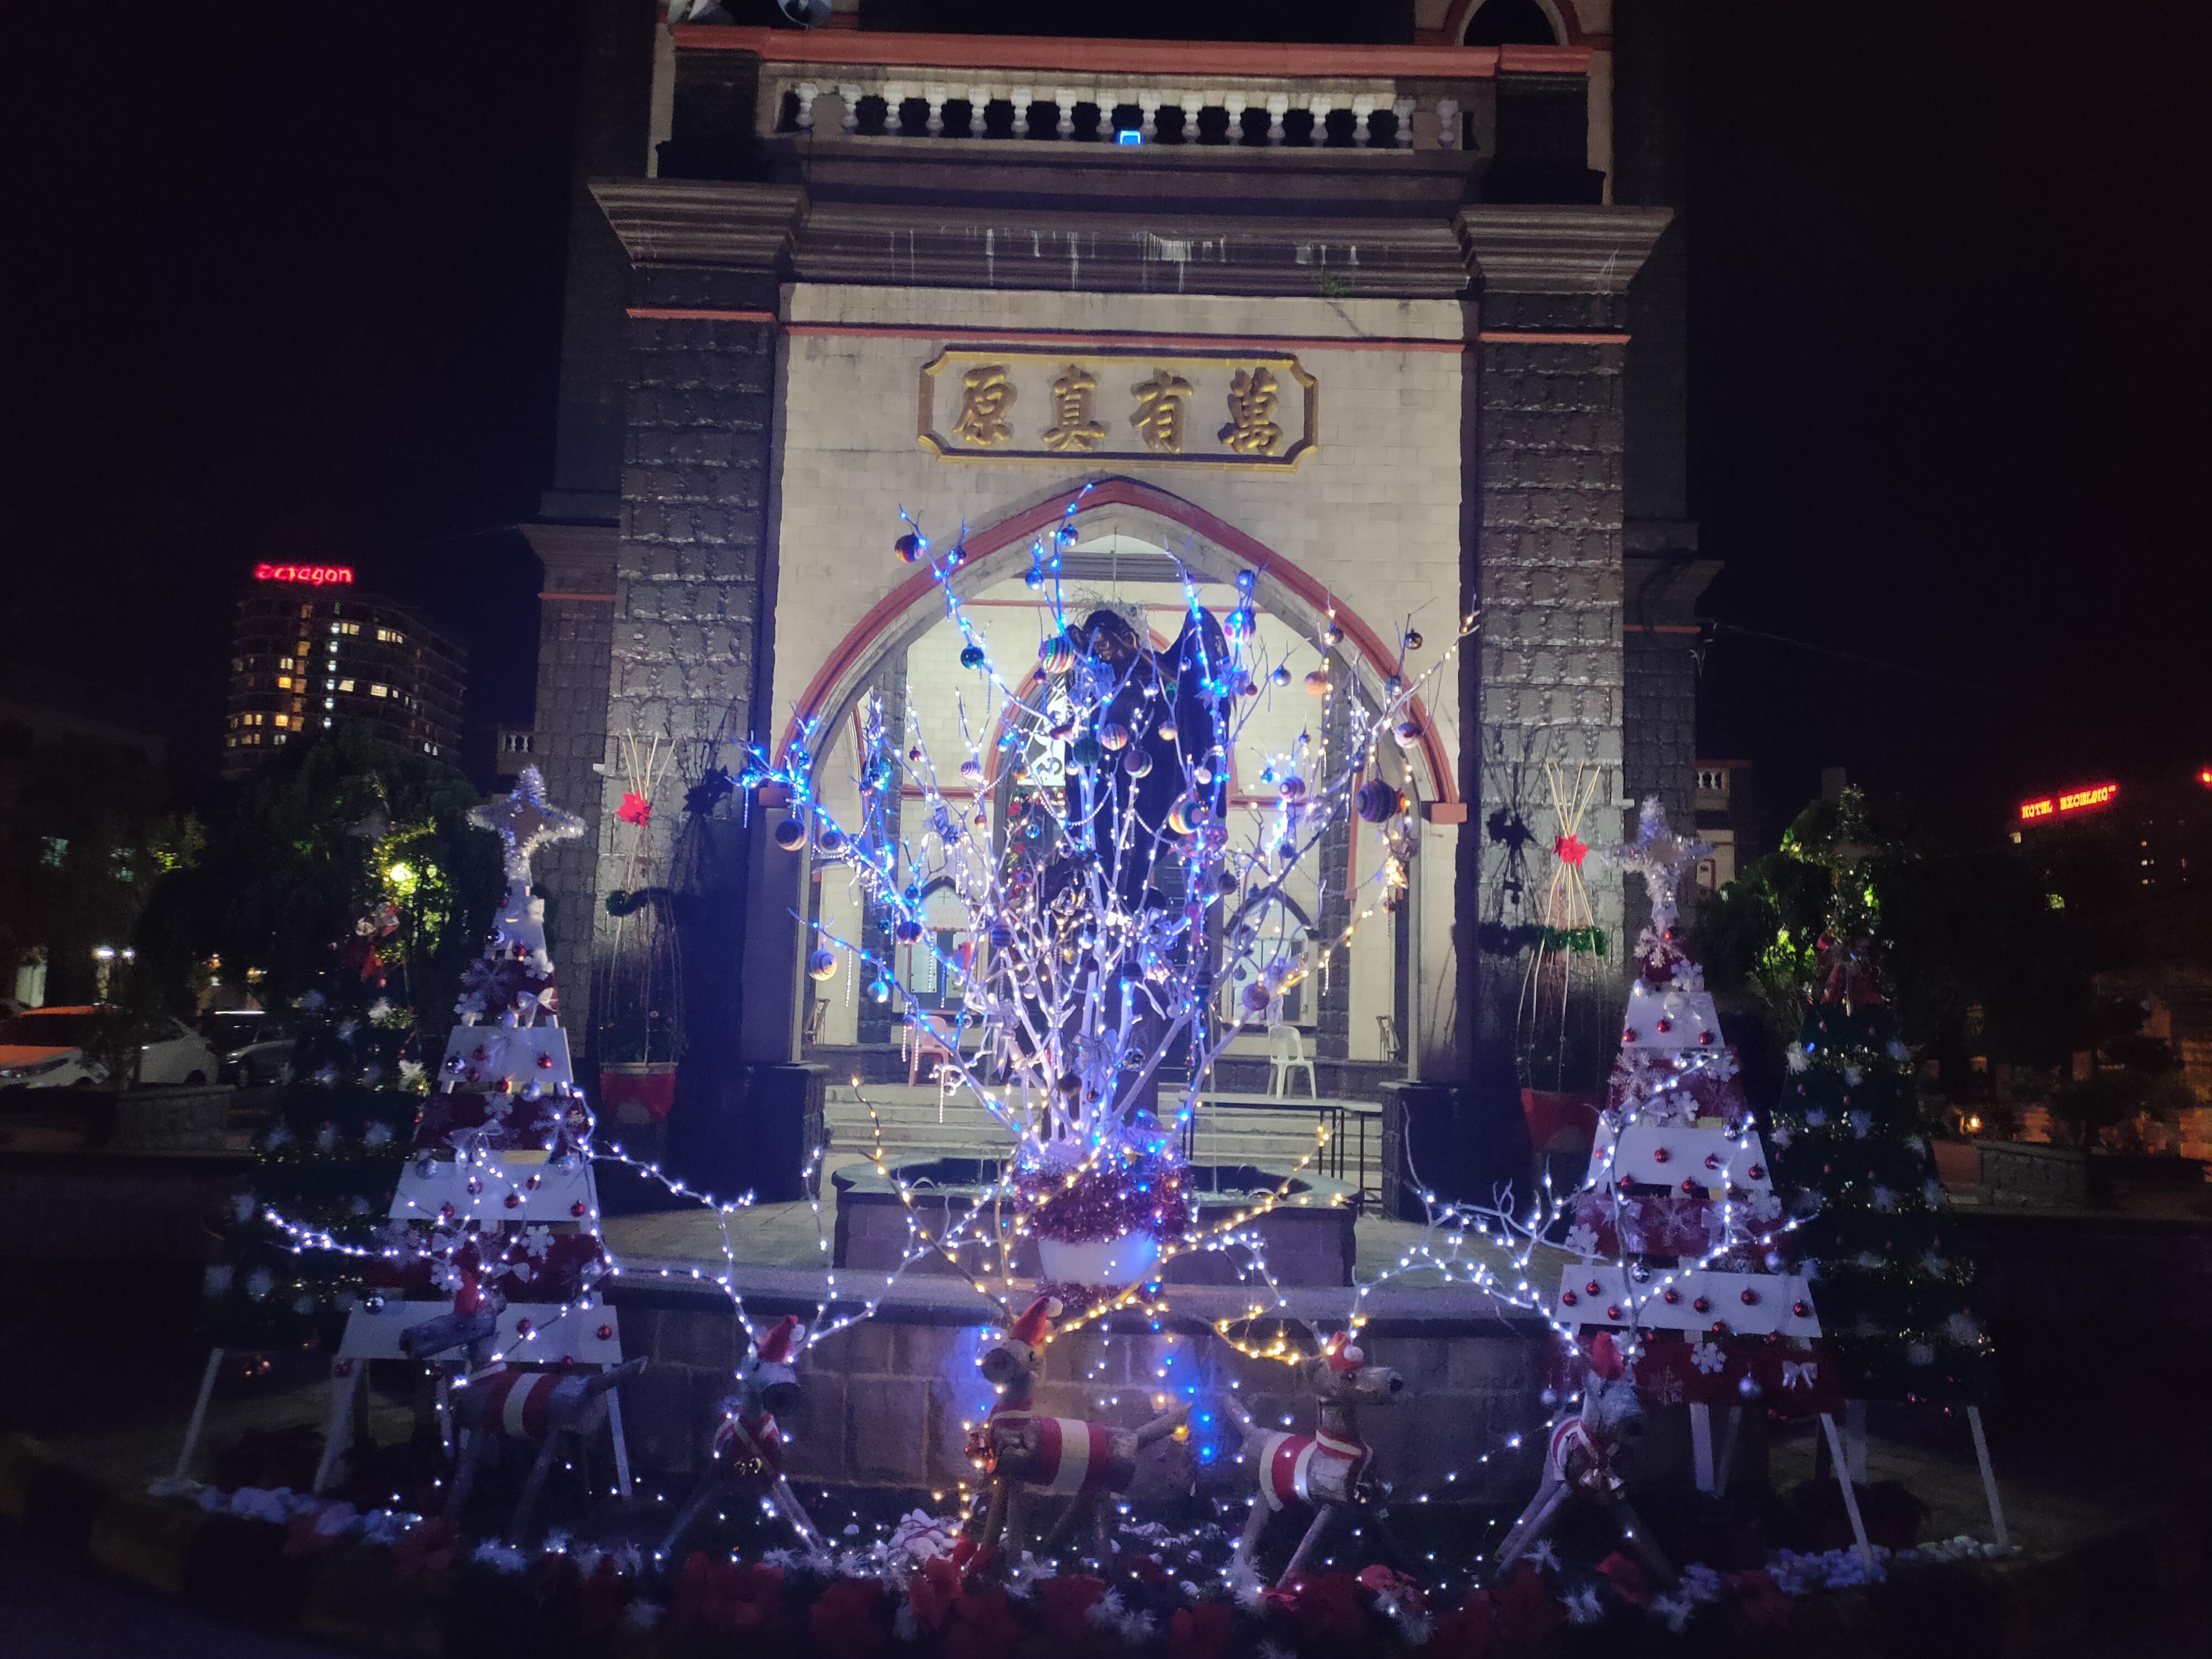 Christmas at SMC in year 2019